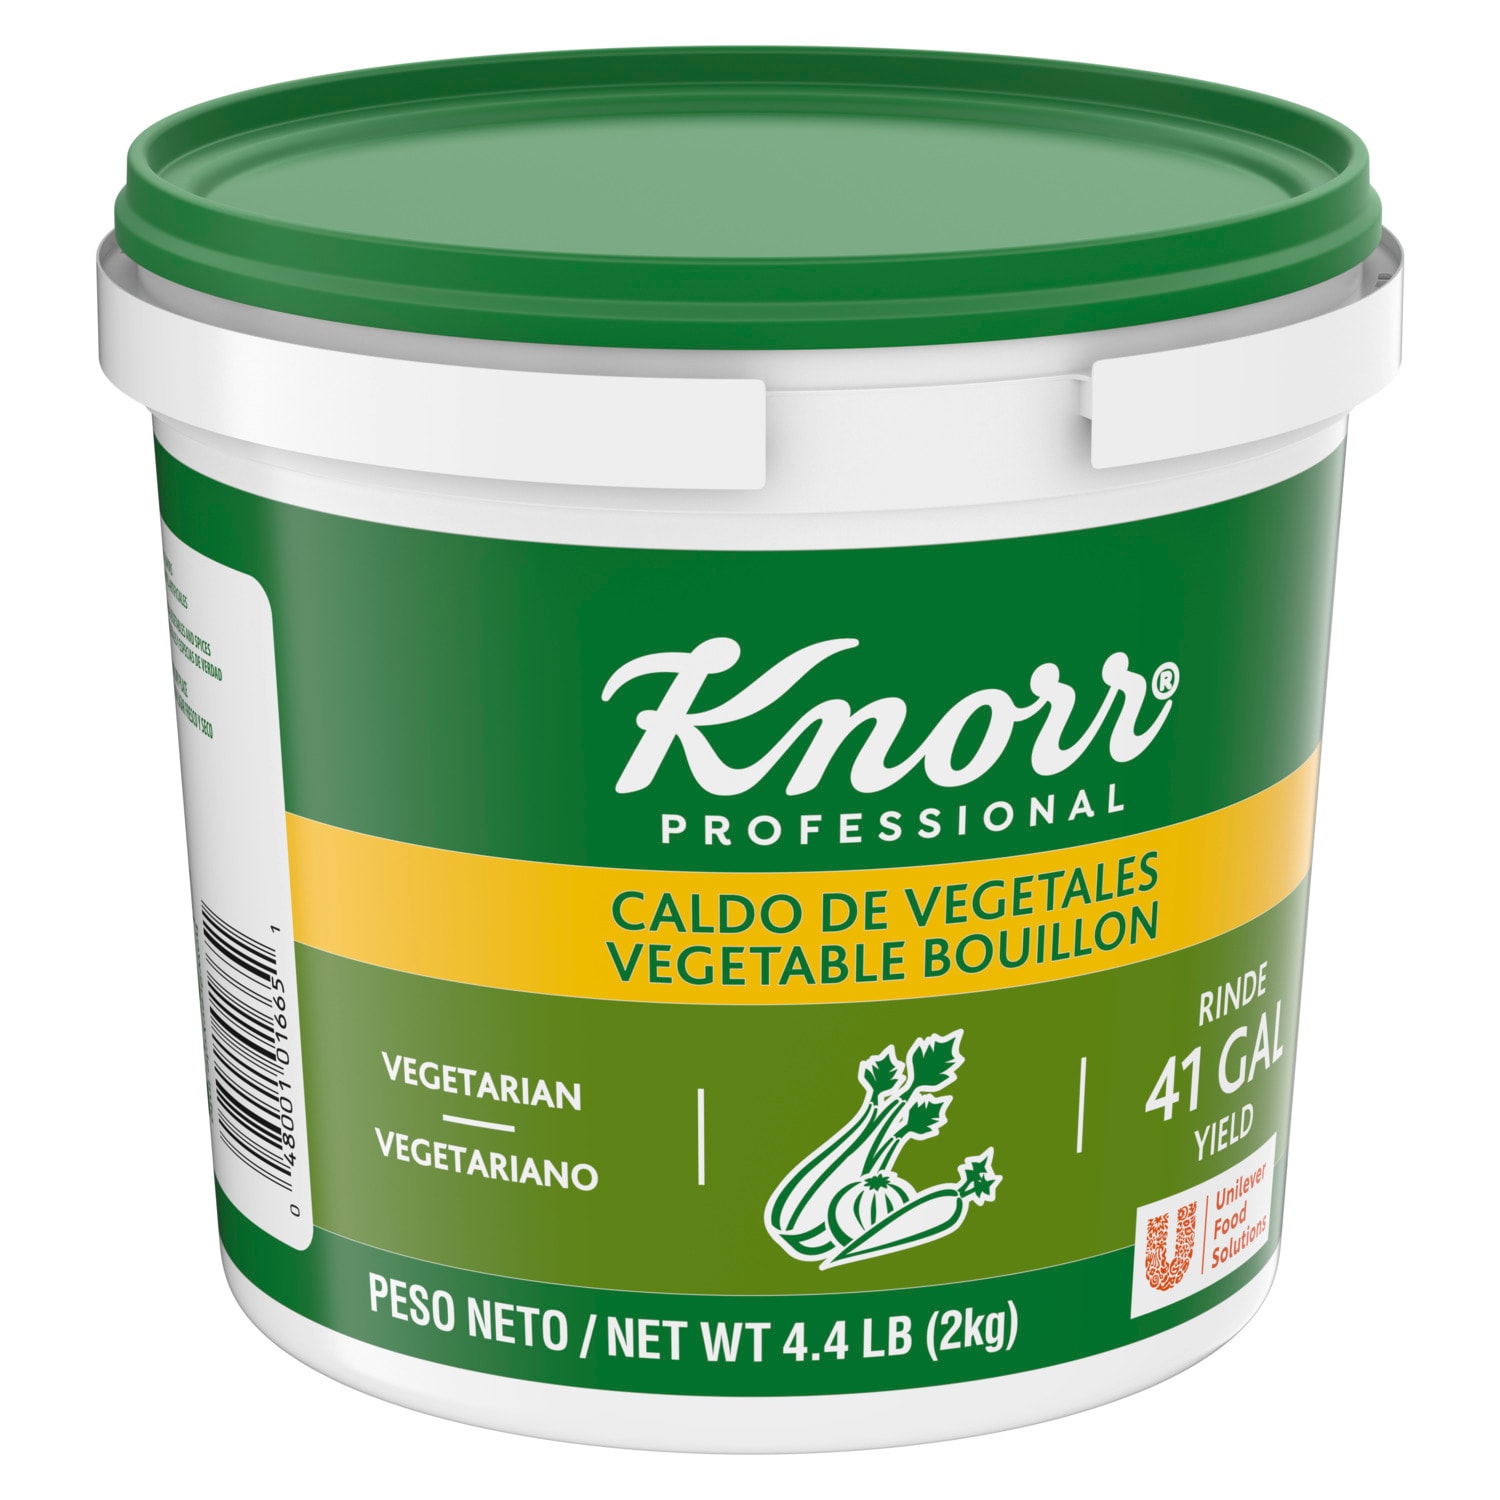 Knorr® Professional Caldo de Vegetales 4.4lb 4 pack - Delivers authentic savory flavor to vegetarian dishes